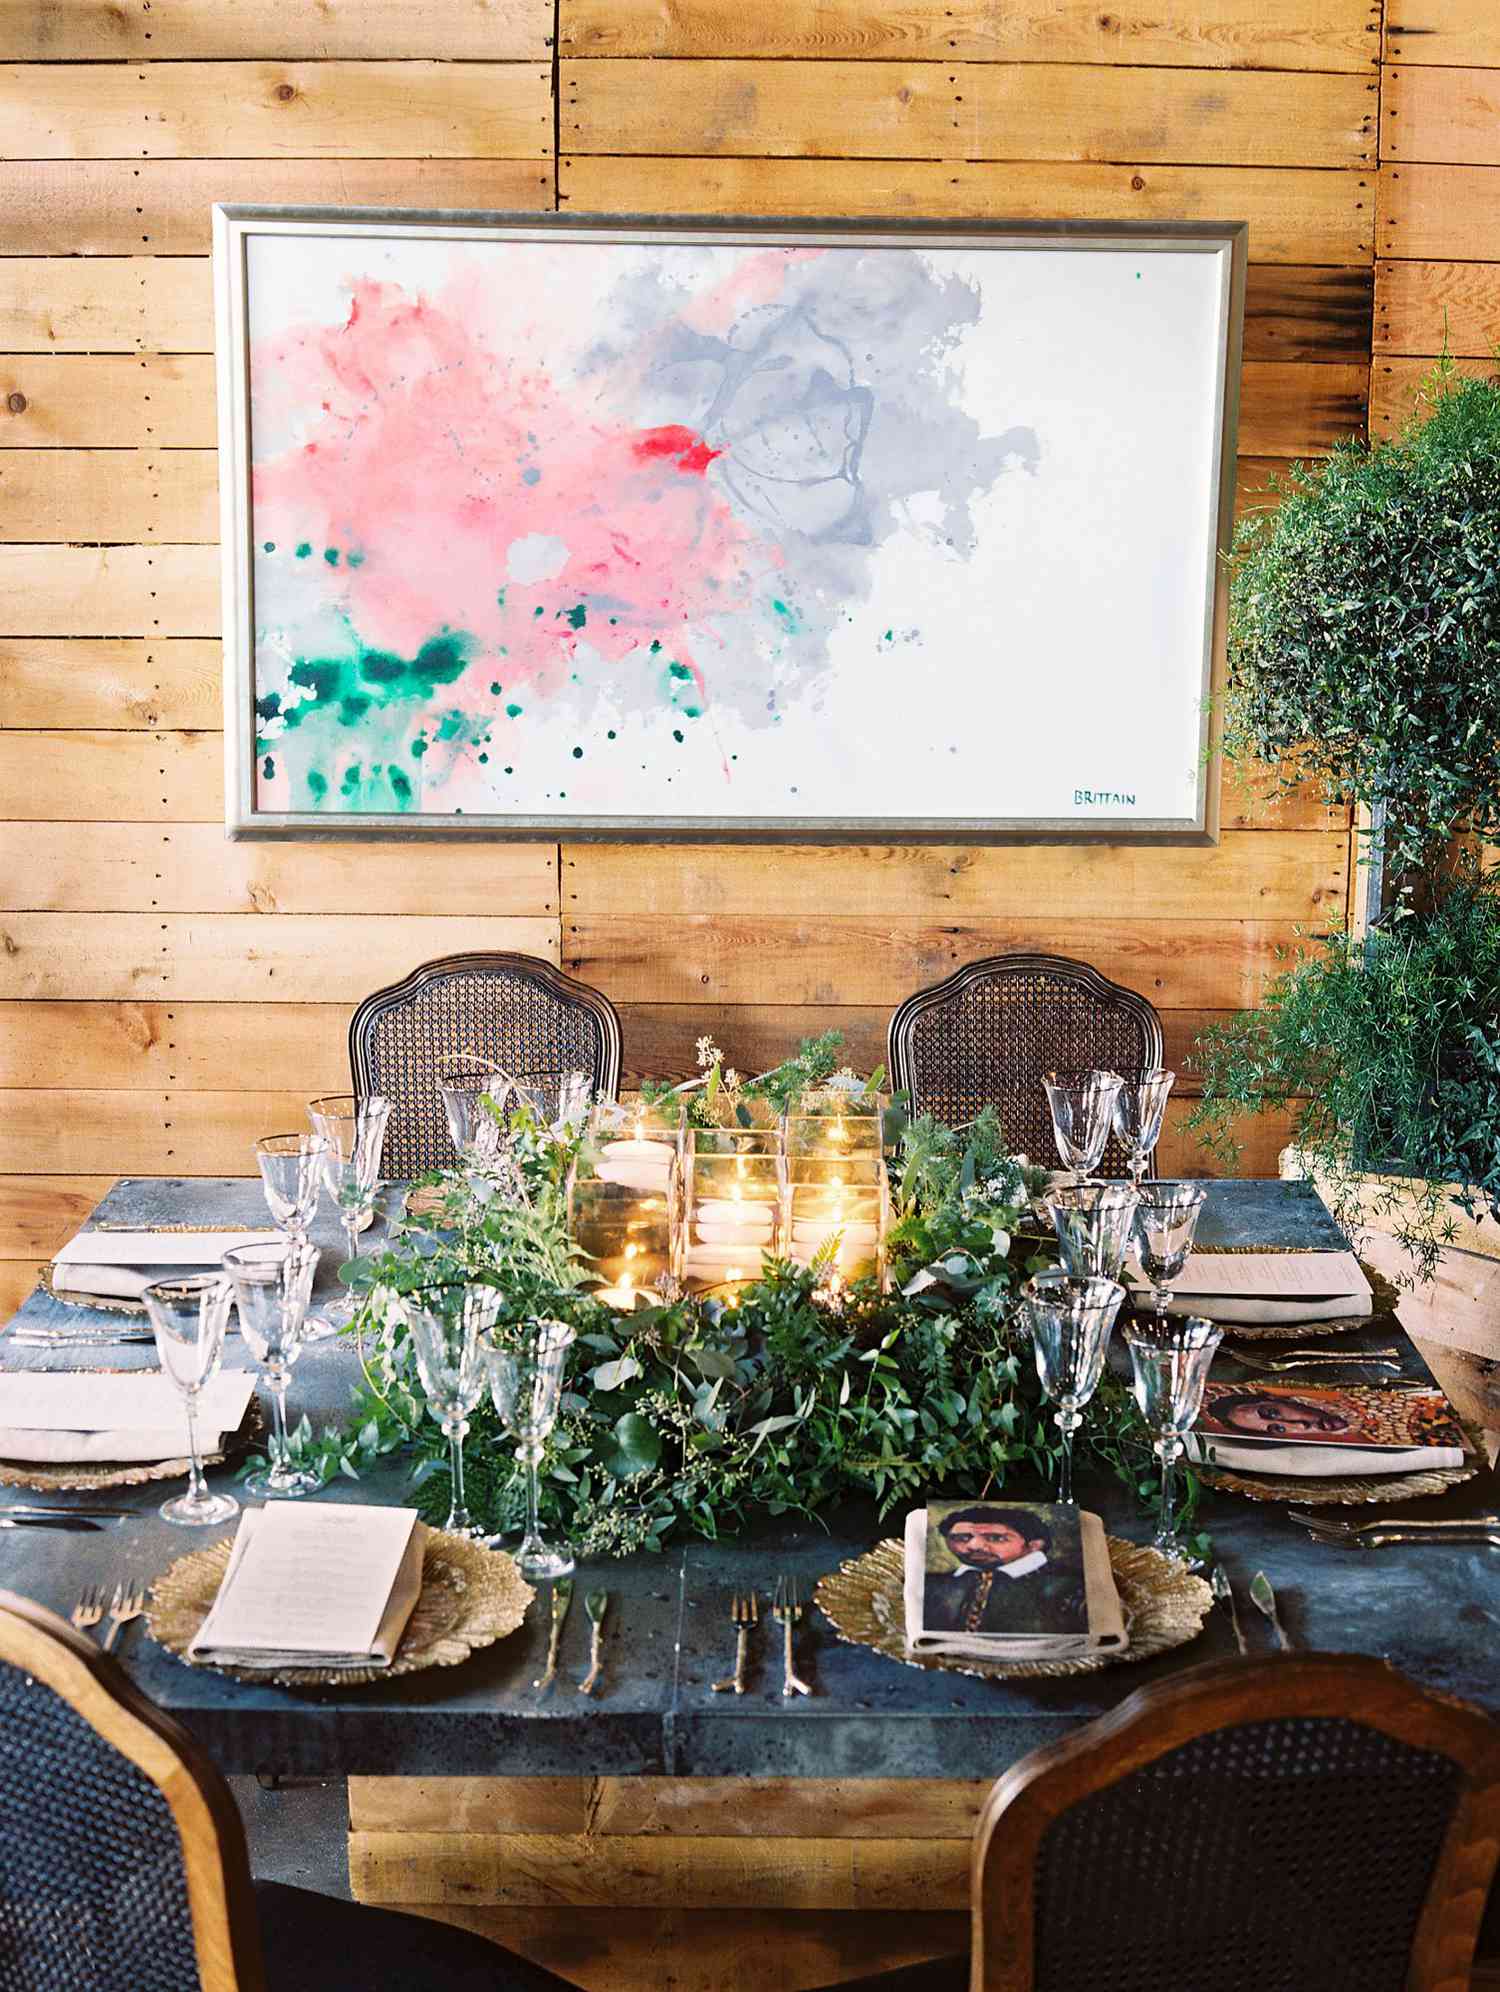 A Rustic, Modern Table